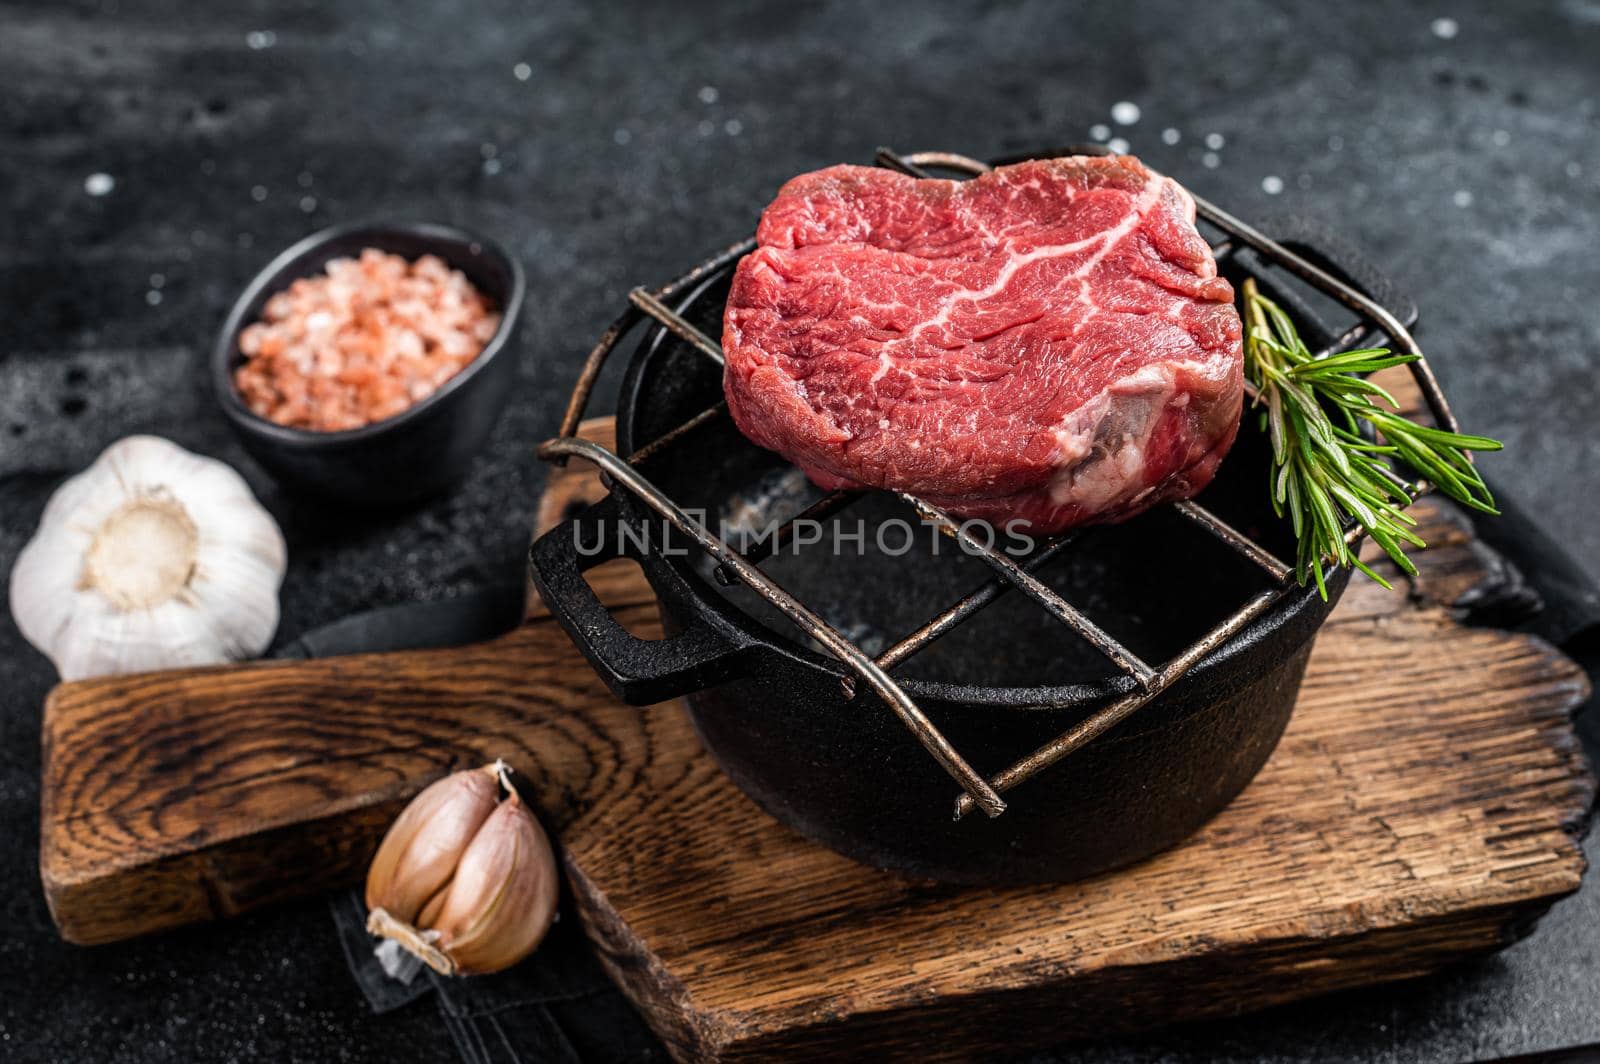 Raw fillet mignon beef steak on a grill with herbs. Black background. Top view.